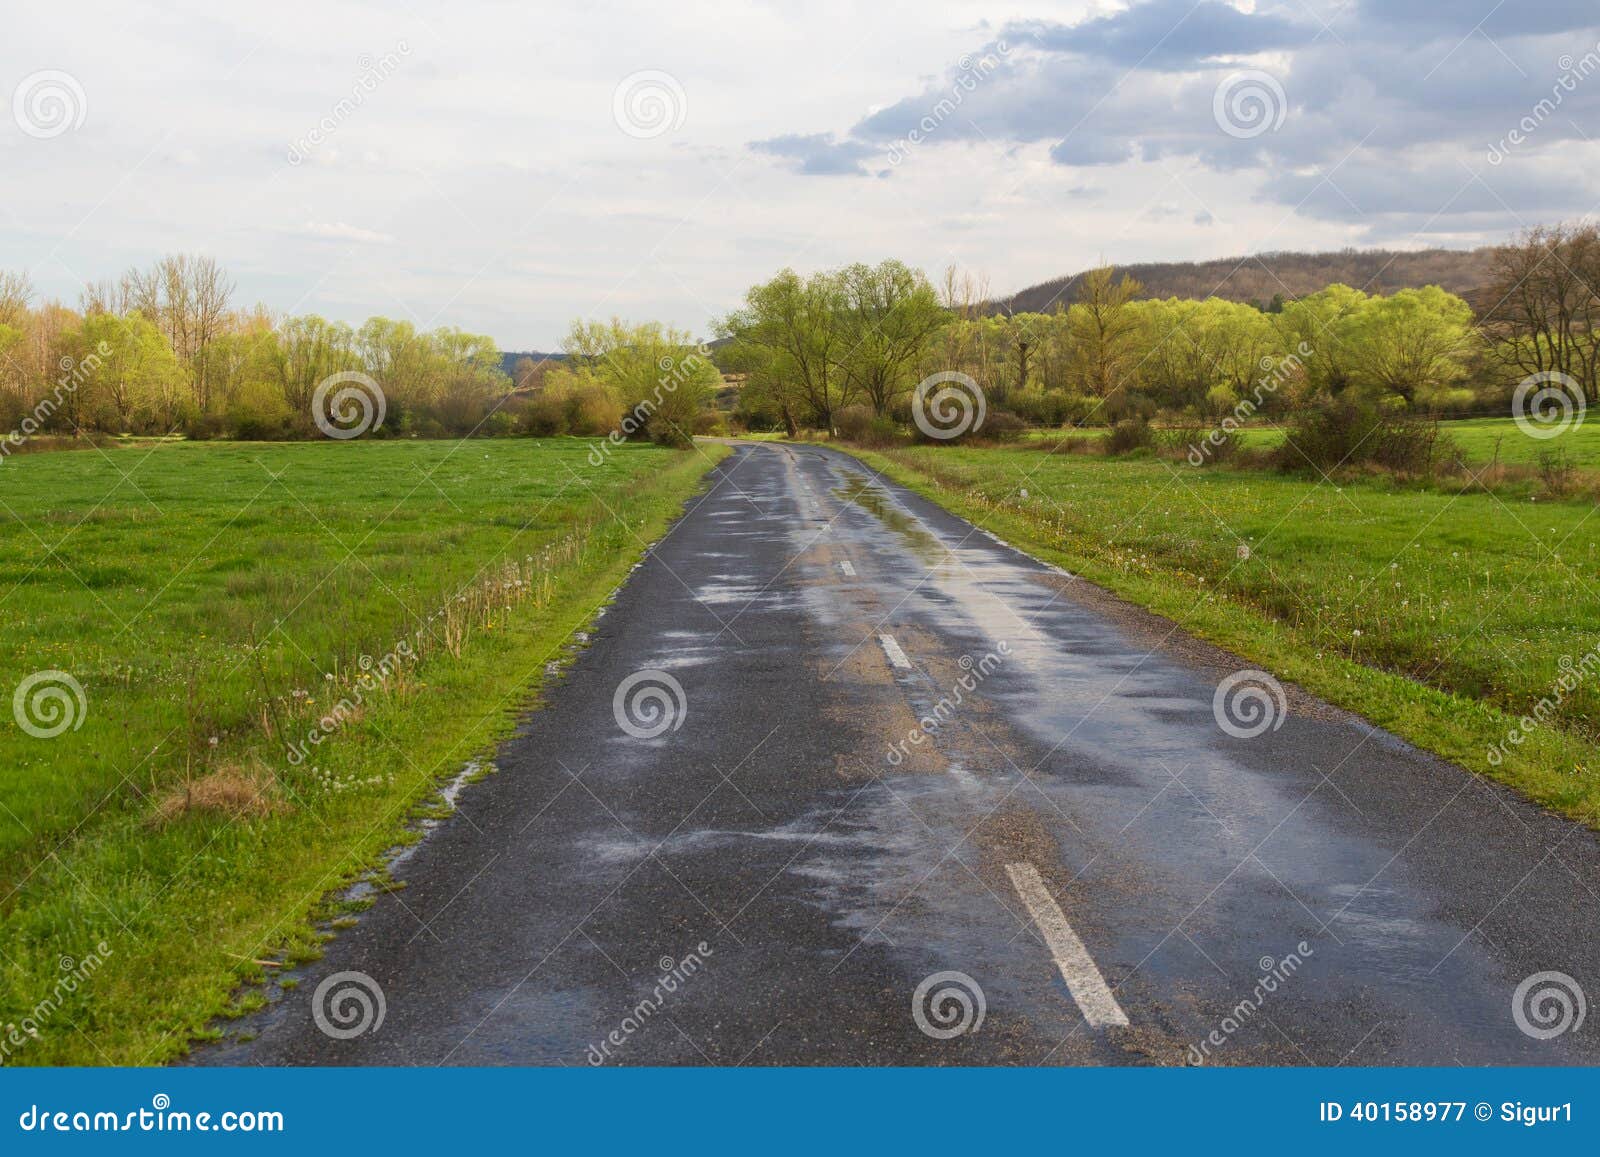 landscape with secondary road